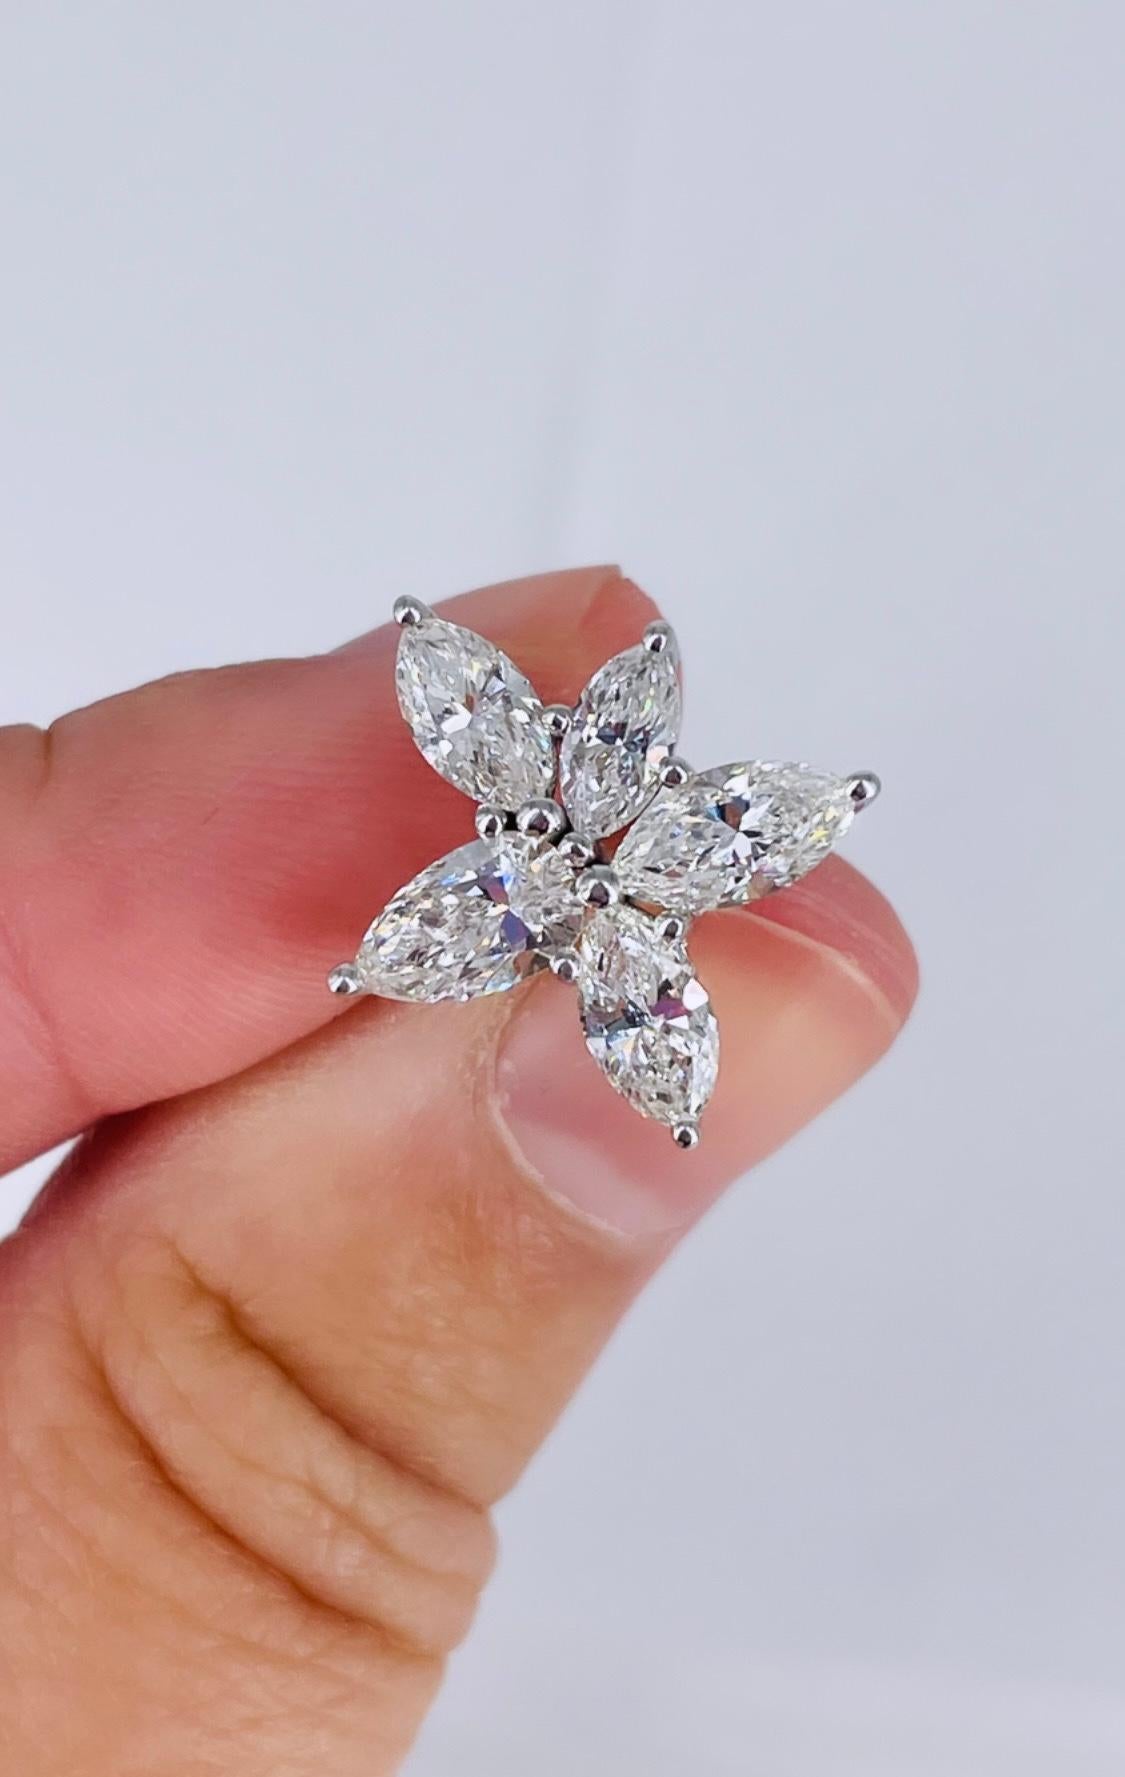 J. Birnbach 3.39 carat Pear and Marquise Diamond Earrings in 18K White Gold In New Condition For Sale In New York, NY